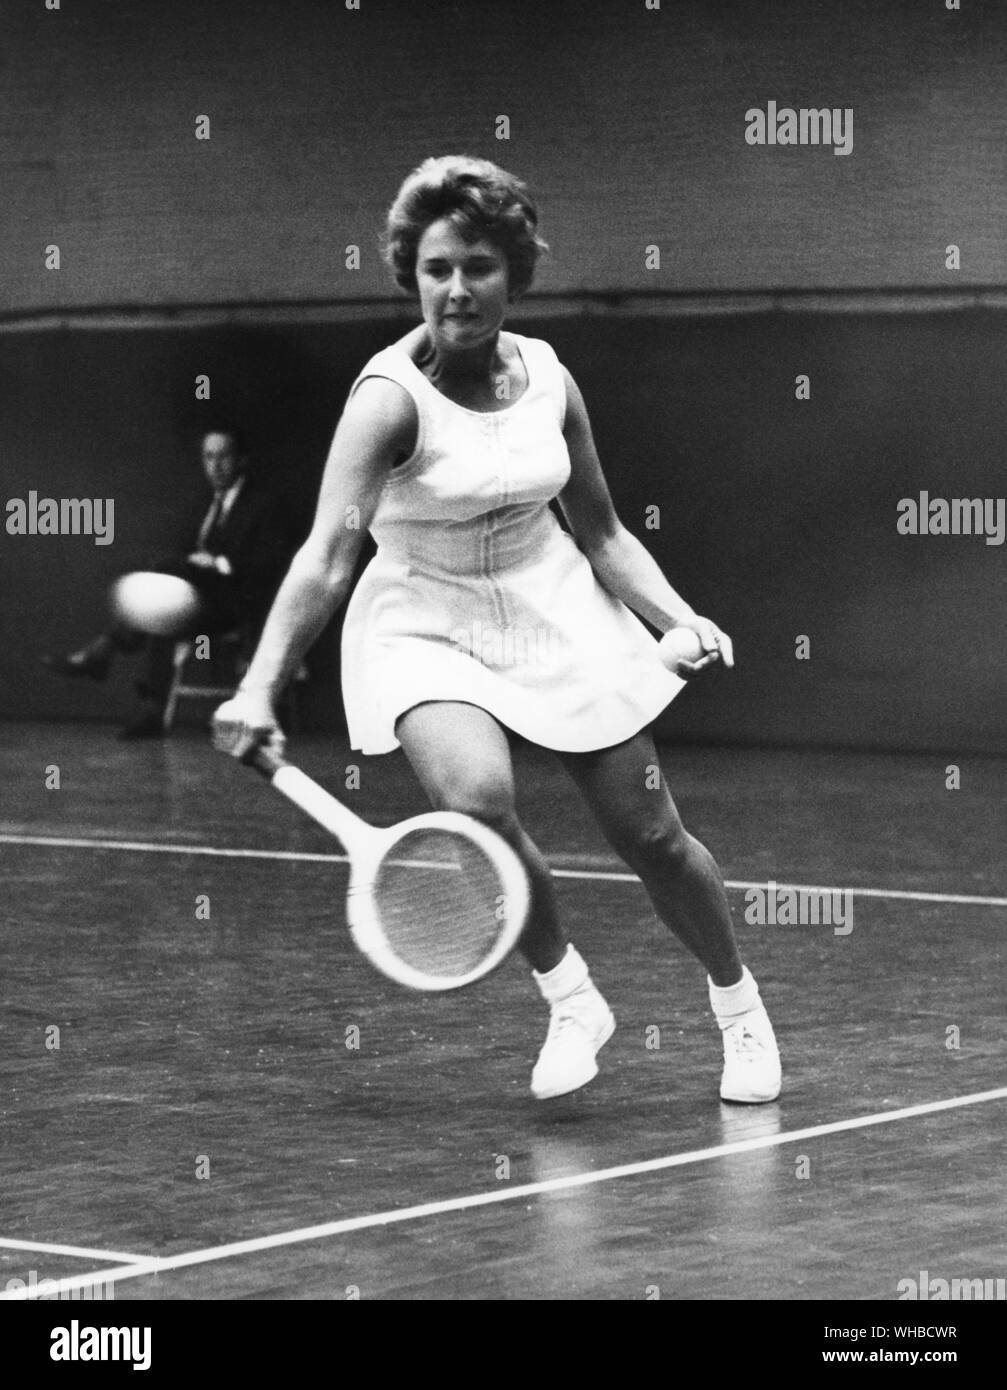 Federation Cup, inaugural meeting, Queens Club, London Miss D Catt (seen here) v. Miss A. Winkler on 18th June 1963.. Stock Photo